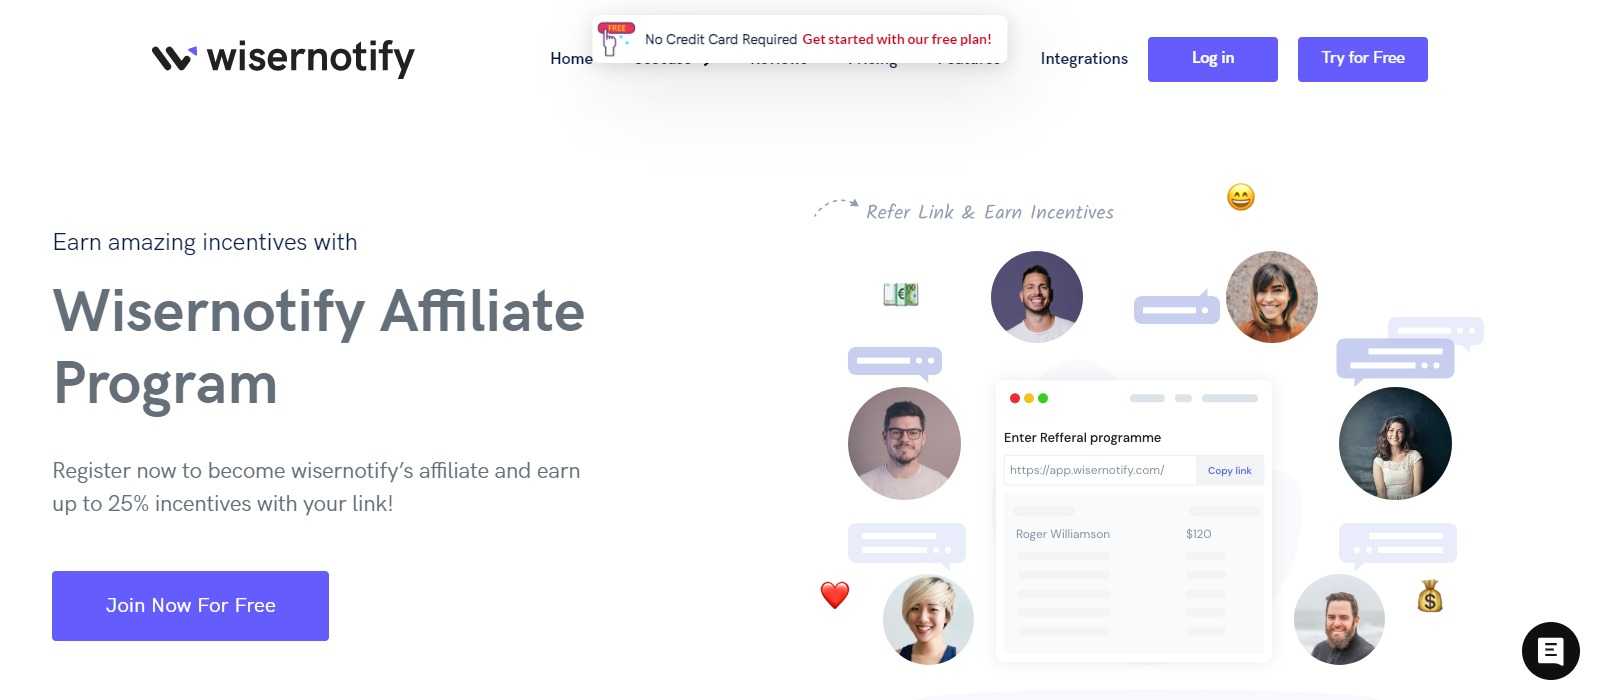 Wisernotify Affiliate Program Review: Get 25% Recurring Commission on each sale